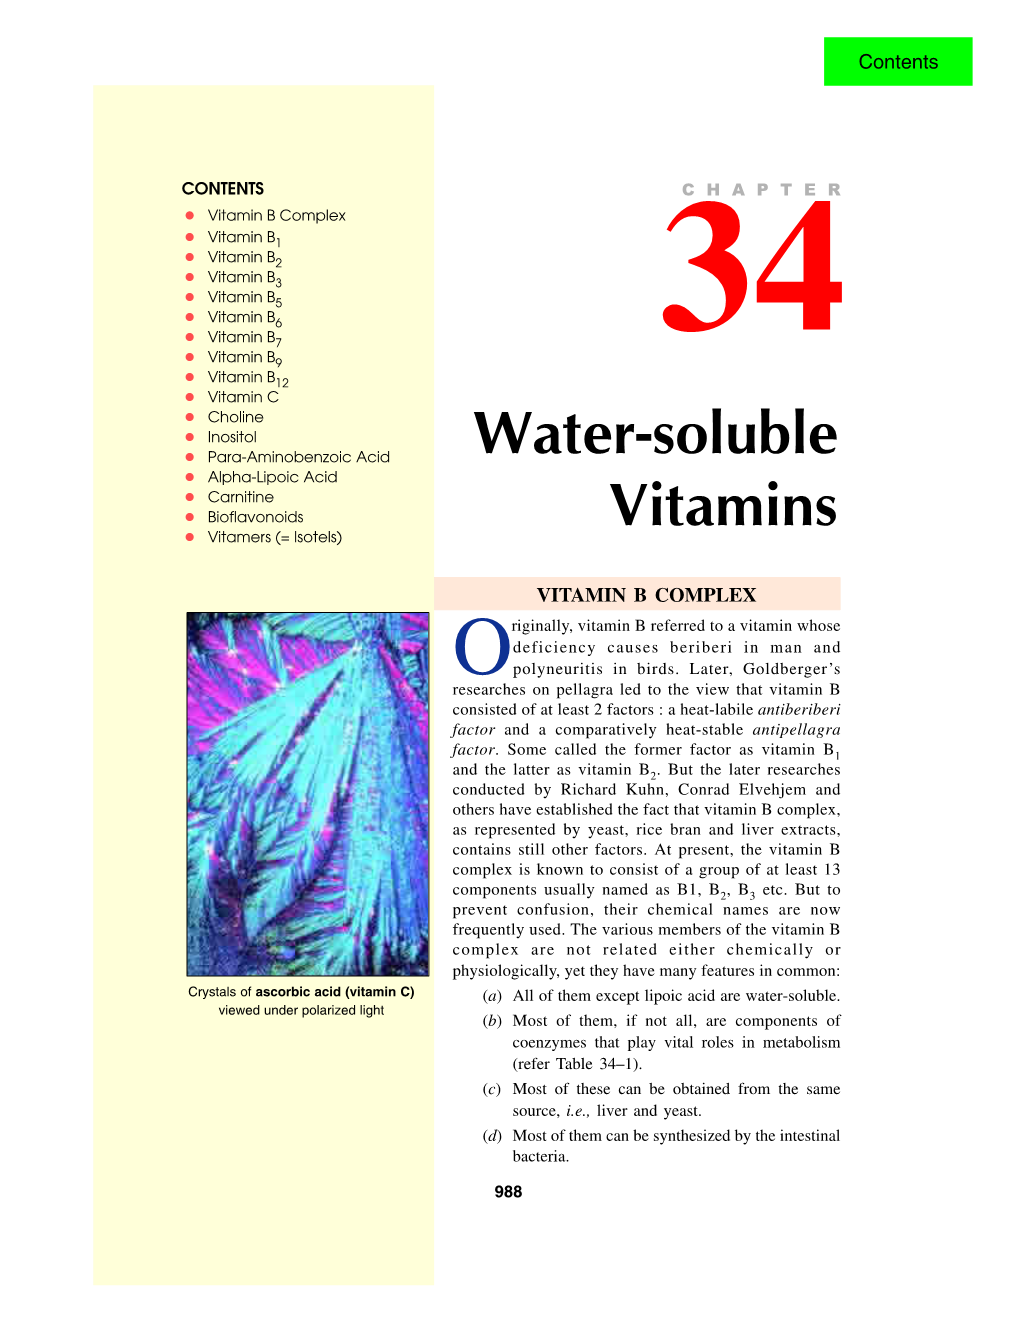 WATER-SOLUBLE VITAMINS 989 Table 34–1